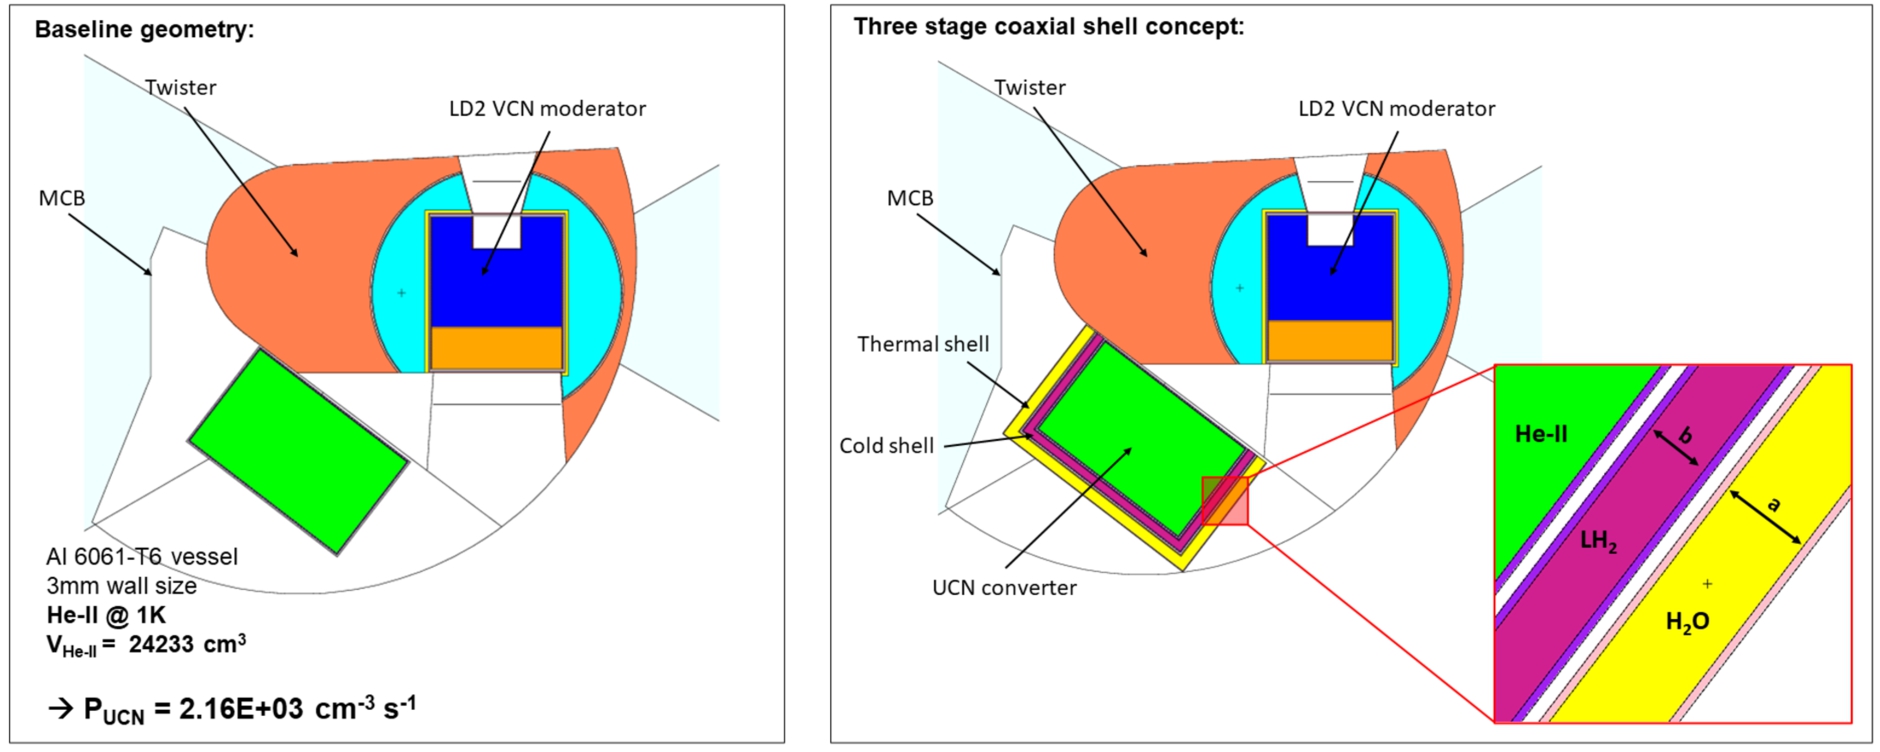 MCNP simulation of coaxial-moderator shell design. Horizontal cut through the MCNP simulated geometry. Left: baseline geometry with He-II filled vessel. Right: coaxial-moderator shell geometry. The moderator shell thickness a & b has been varied in a parameter study.